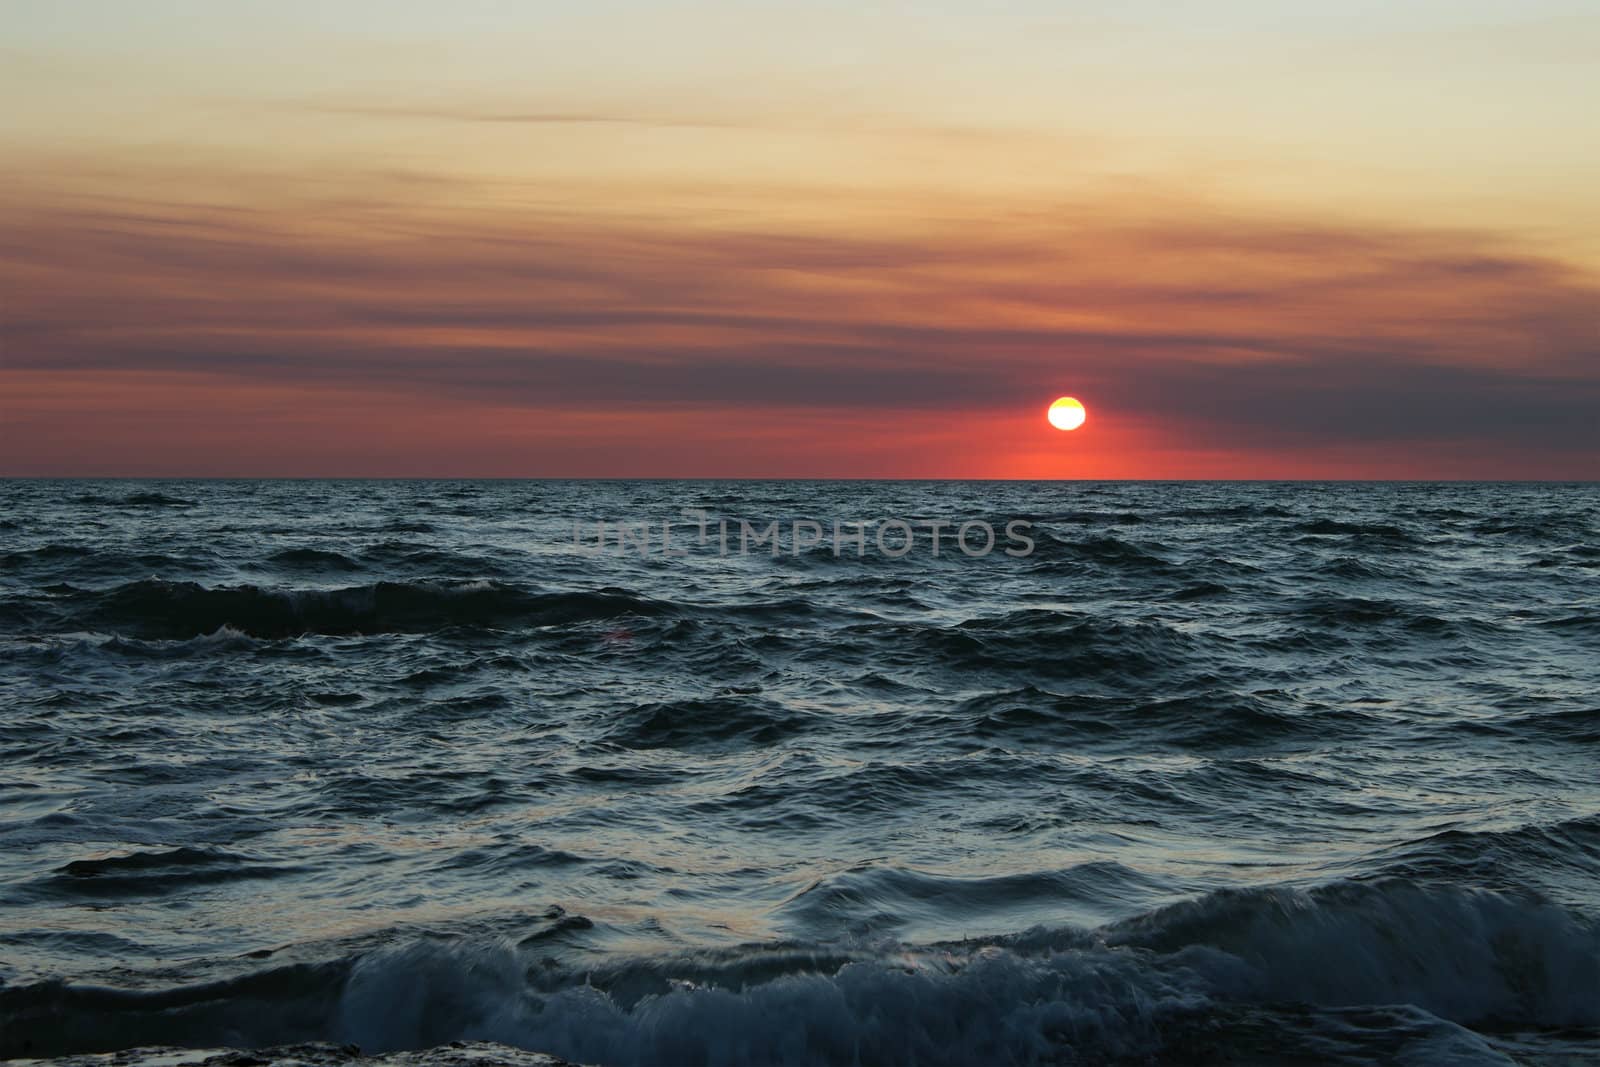 Sunset at the Caspian Sea in August.